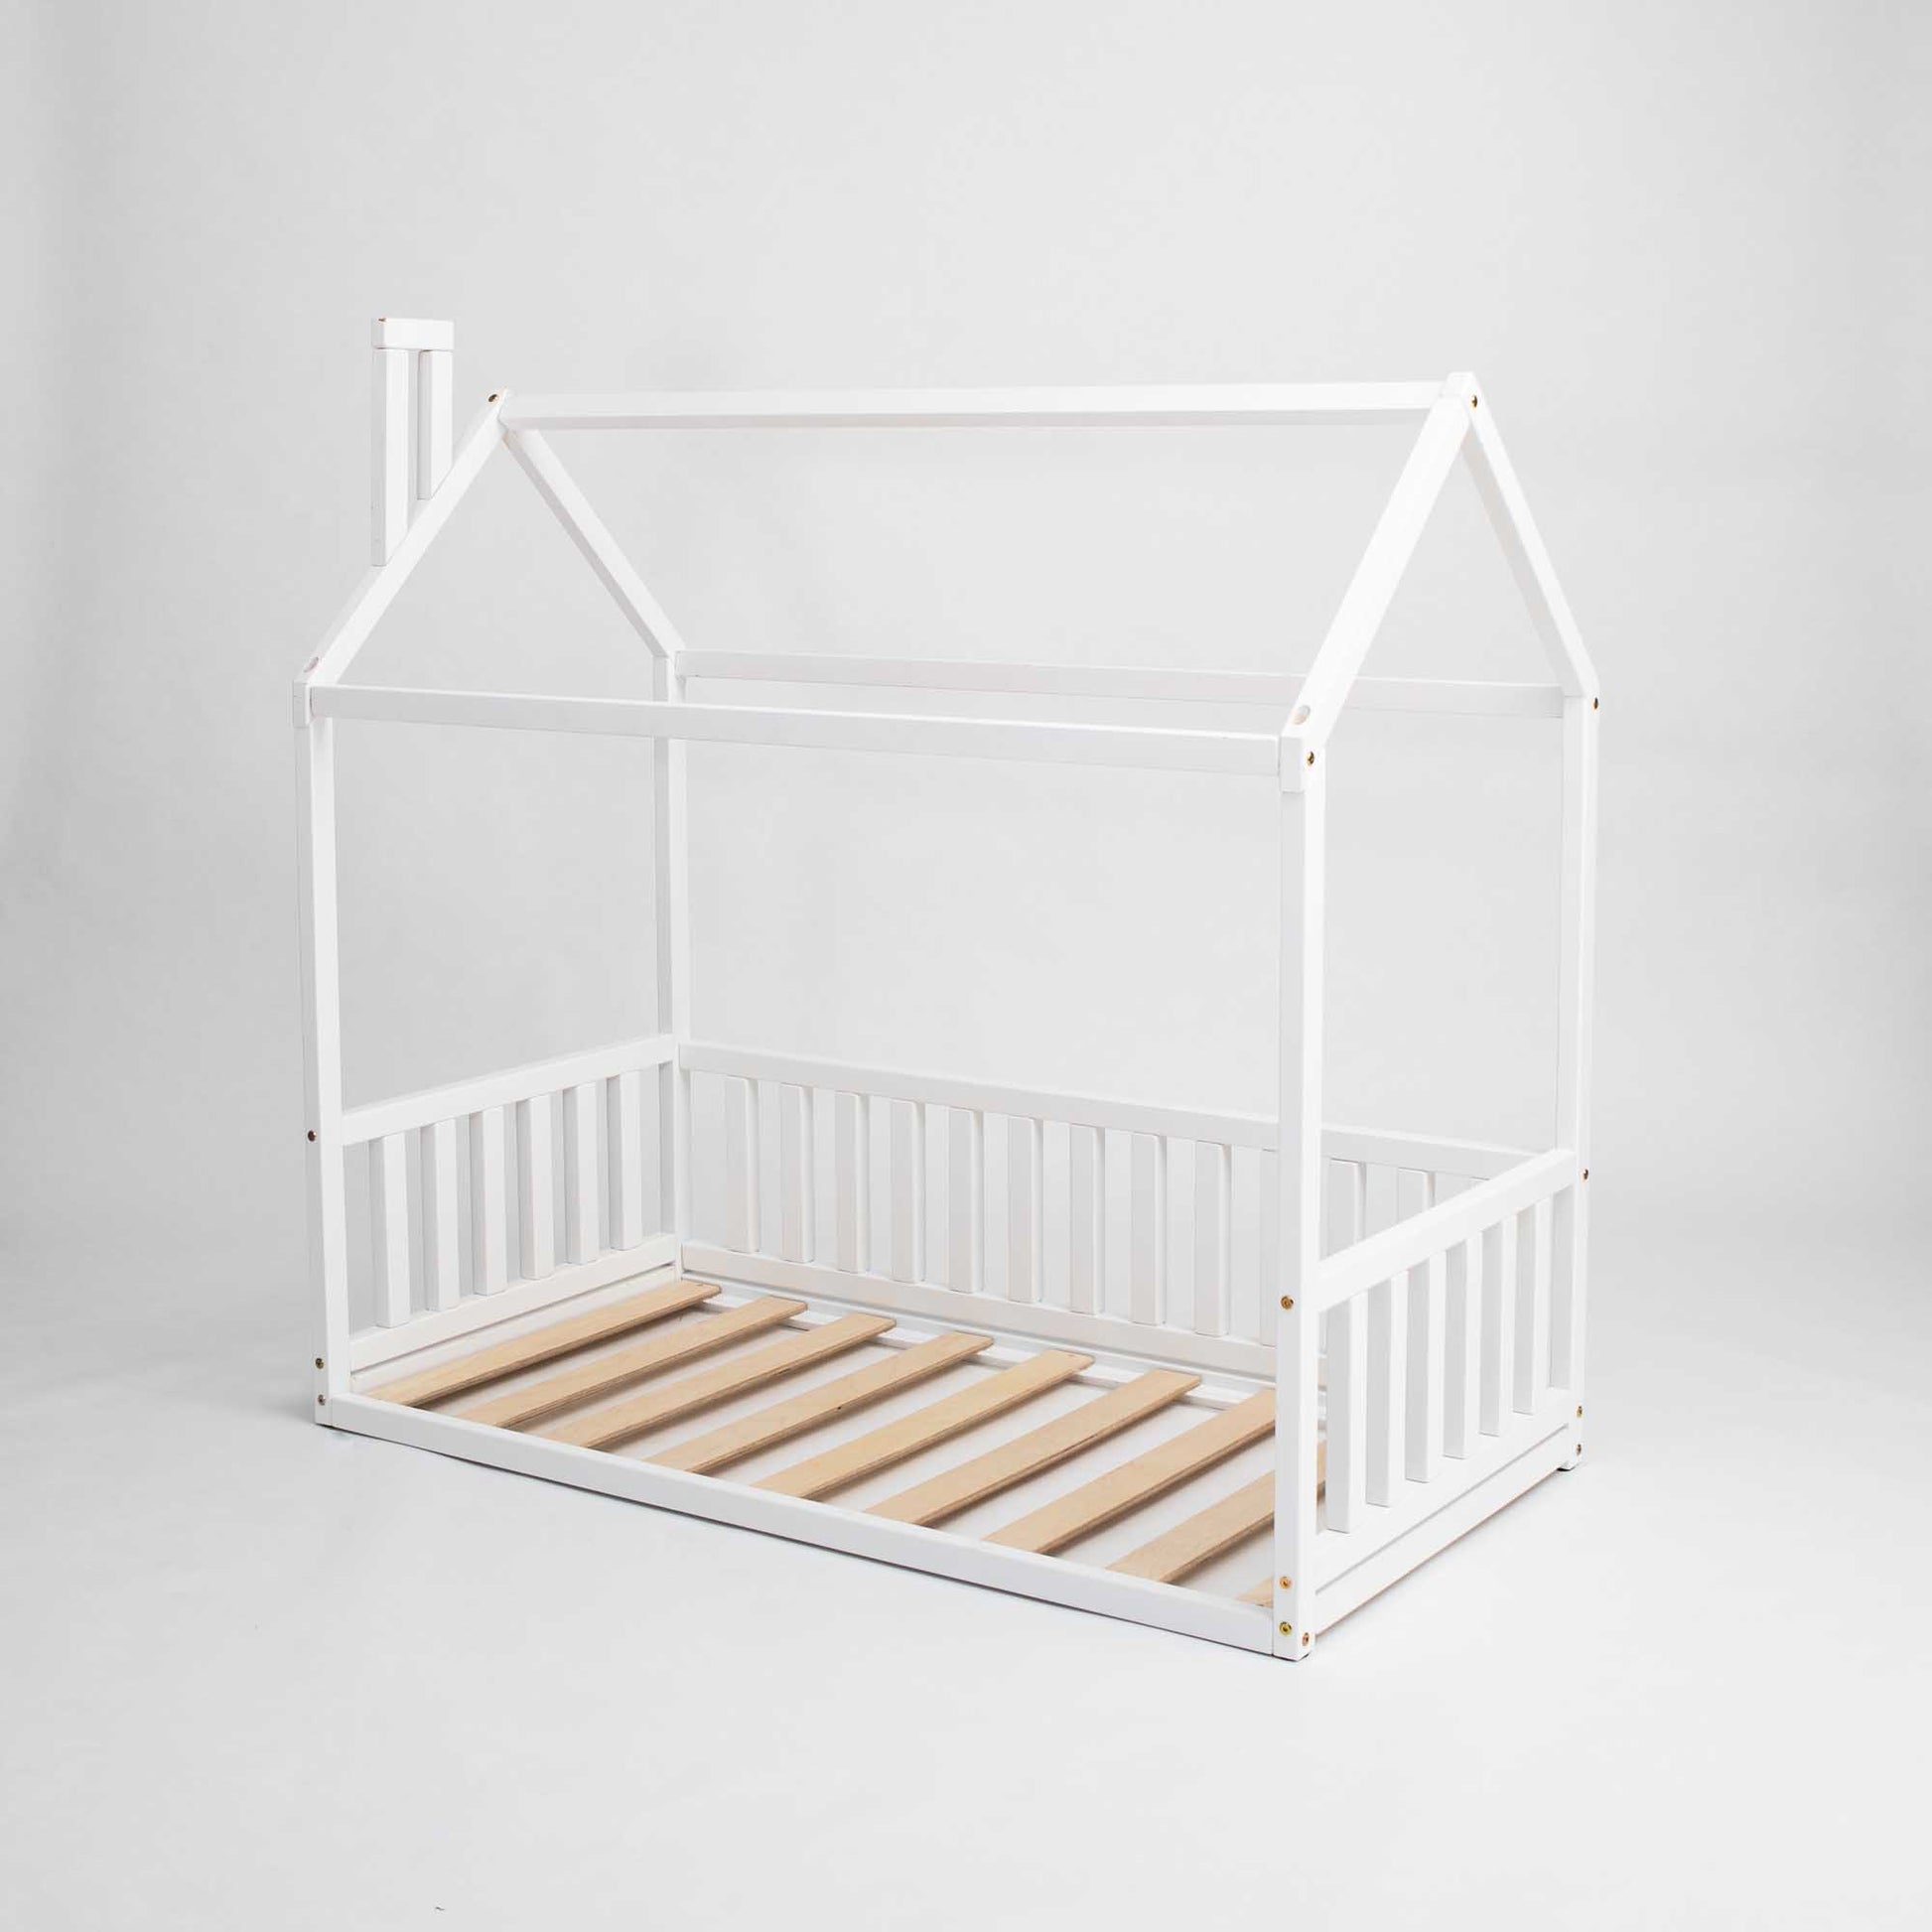 A Sweet Home From Wood Kids' house-frame bed with 3-sided rails in a cozy sleep haven design made of white wooden slats.